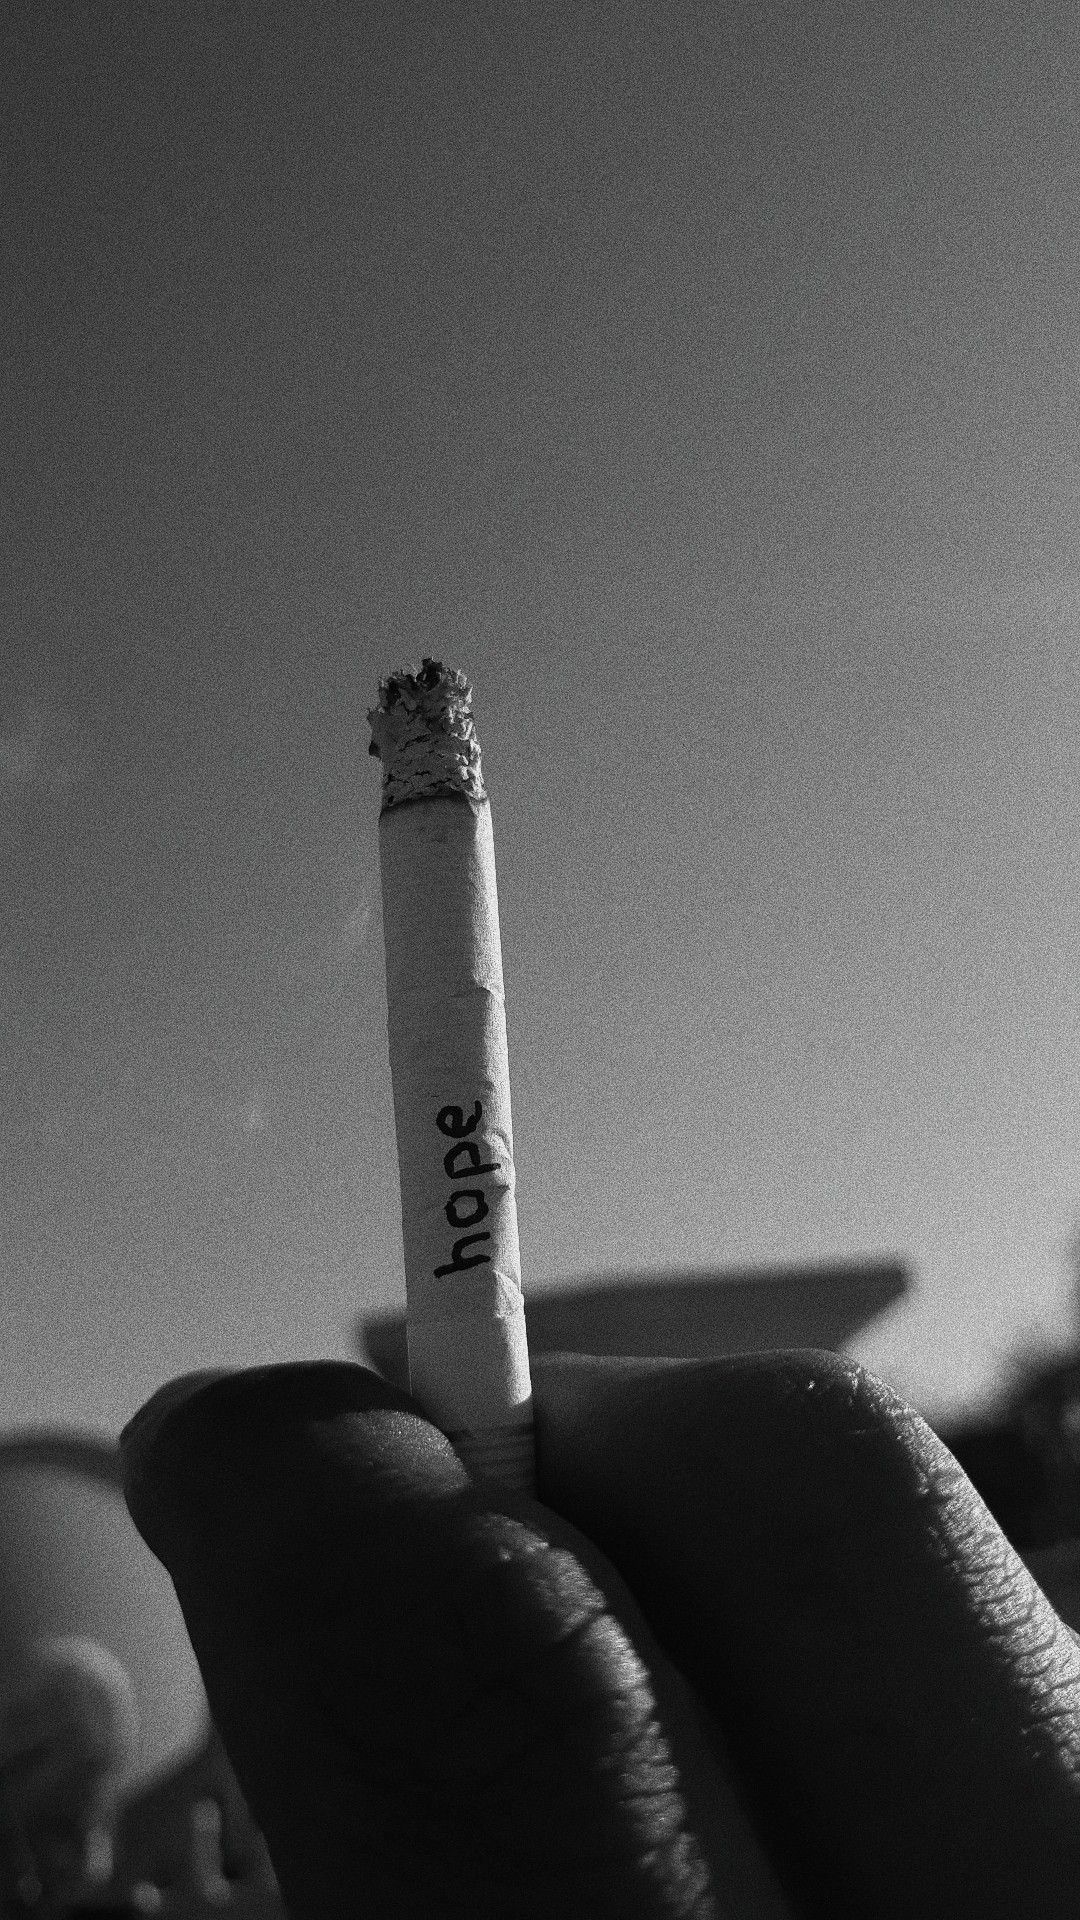 A person holding up an unlit cigarette - Smoke